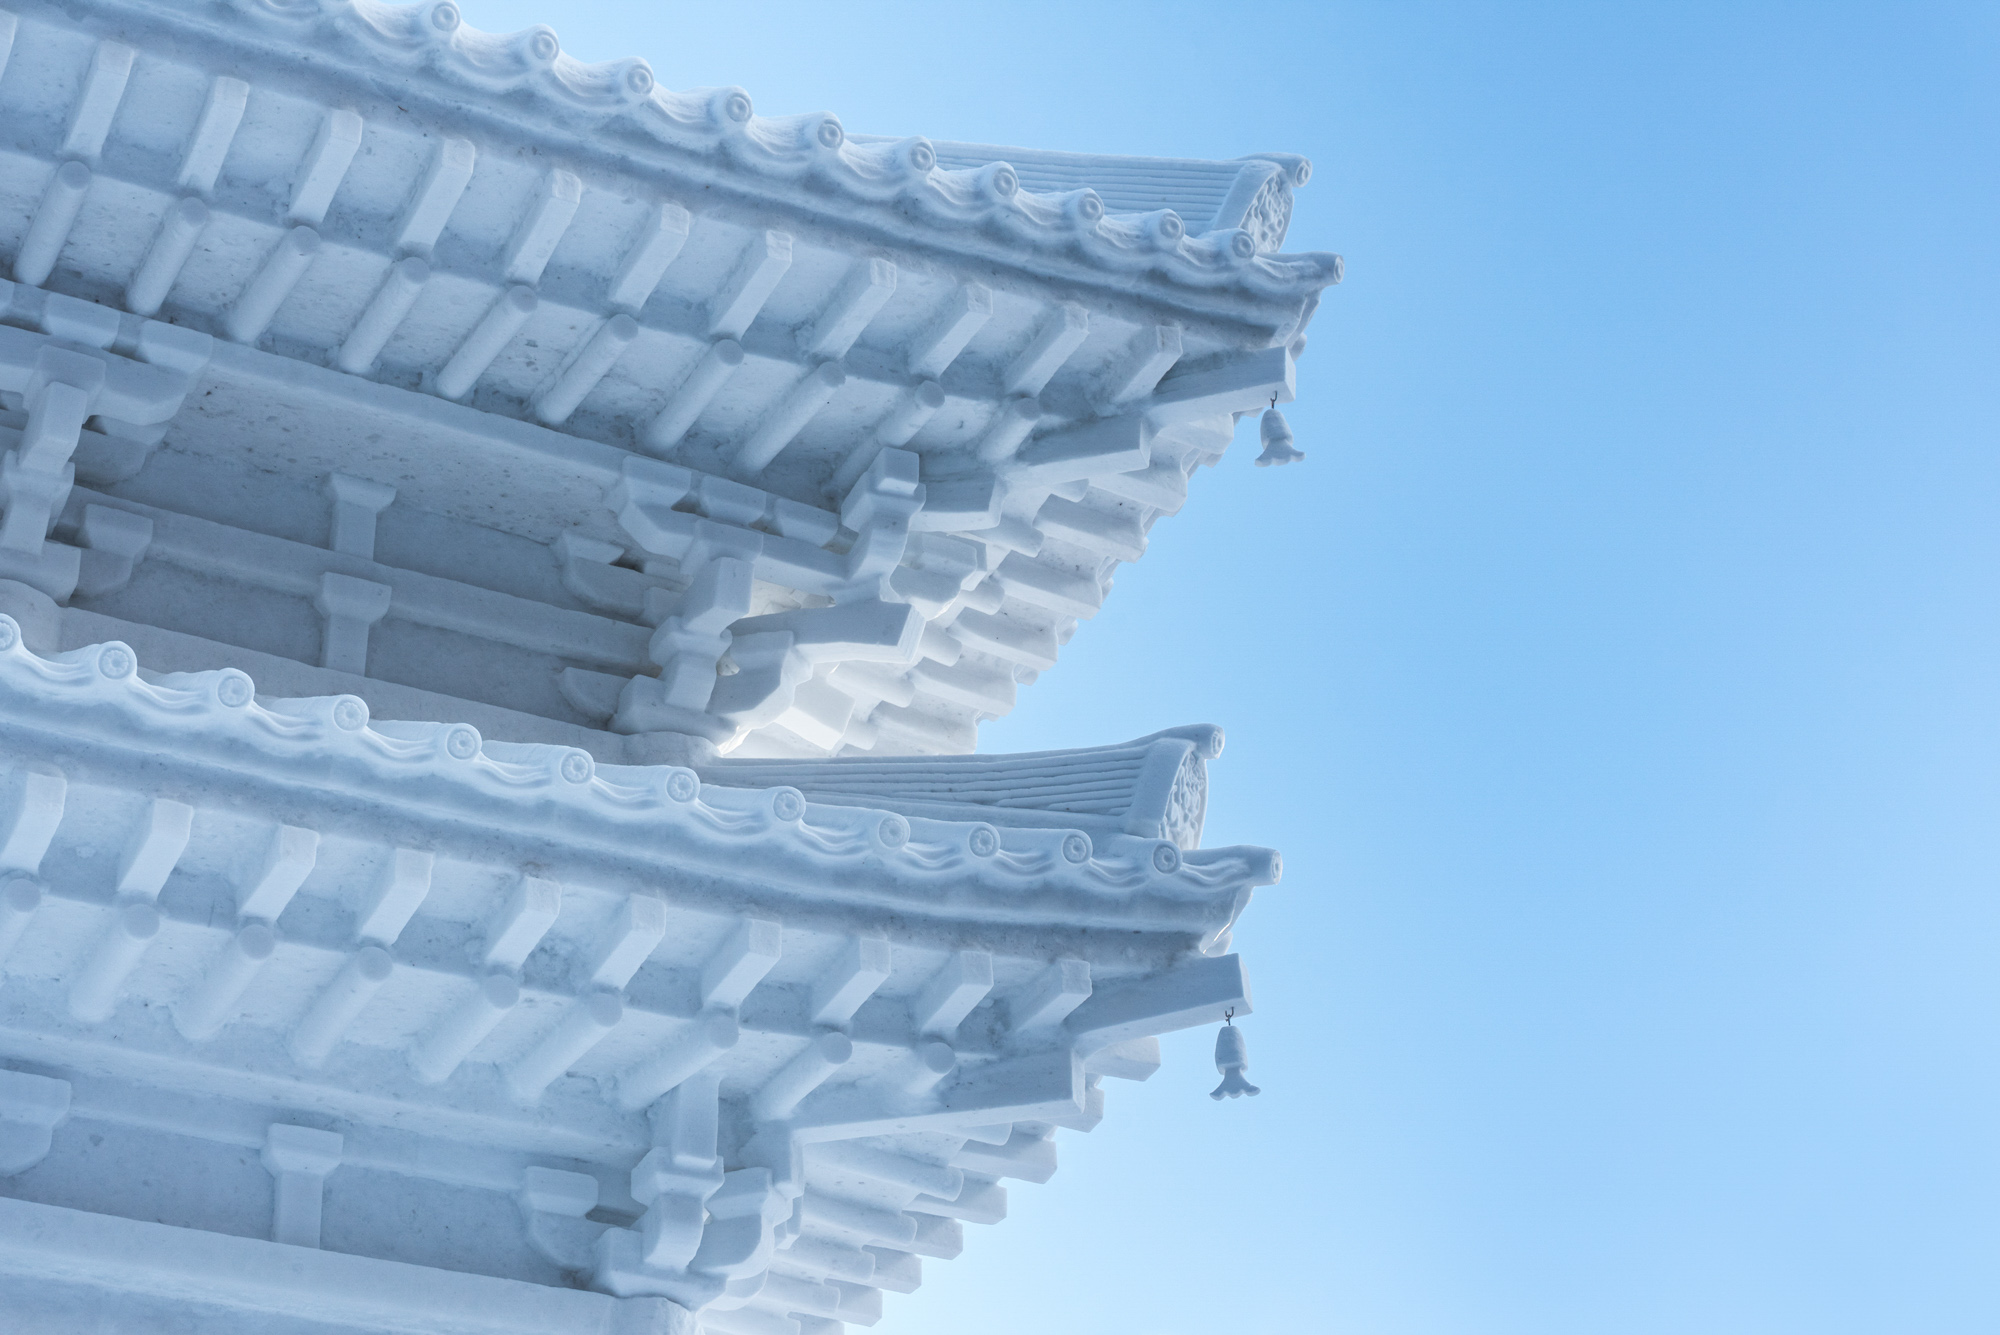 details of a huge snow temple at the "Sapporo Snow and Ice Festival"